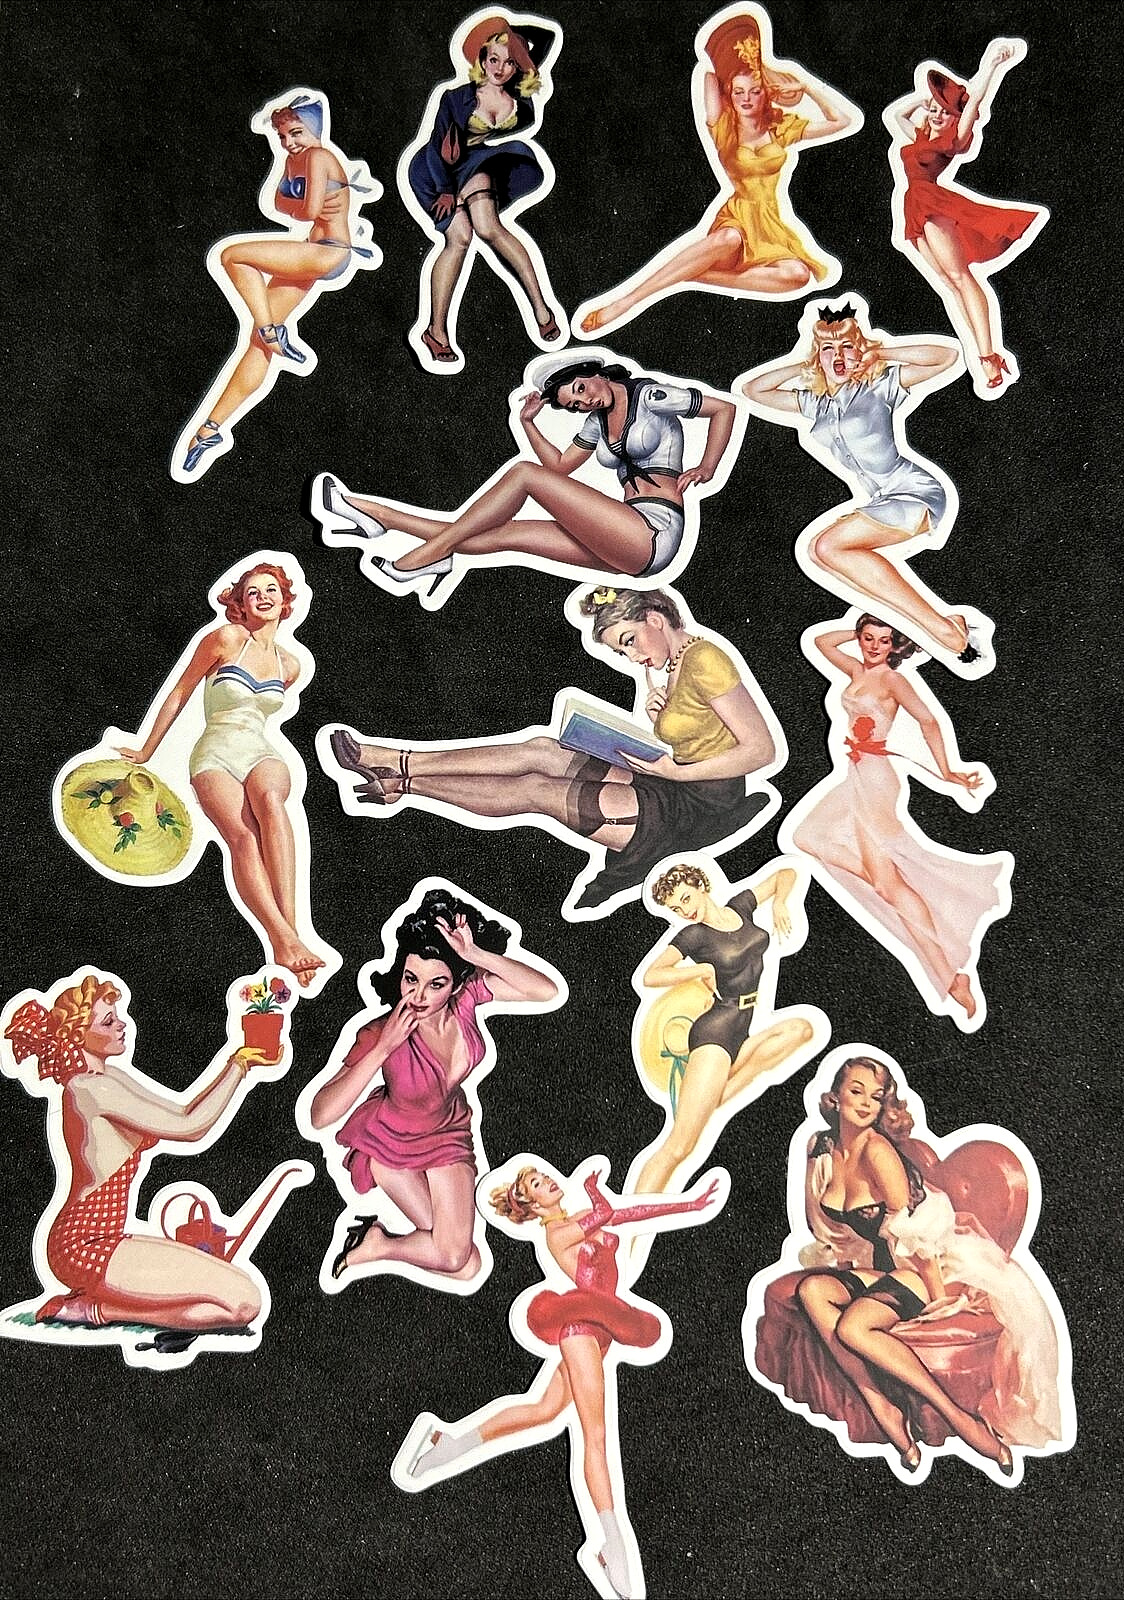 VINTAGE CLASSIC MODELS🔥 LADIES-14 Lot STICKERS-PHONE-LAPTOP GREAT DEAL